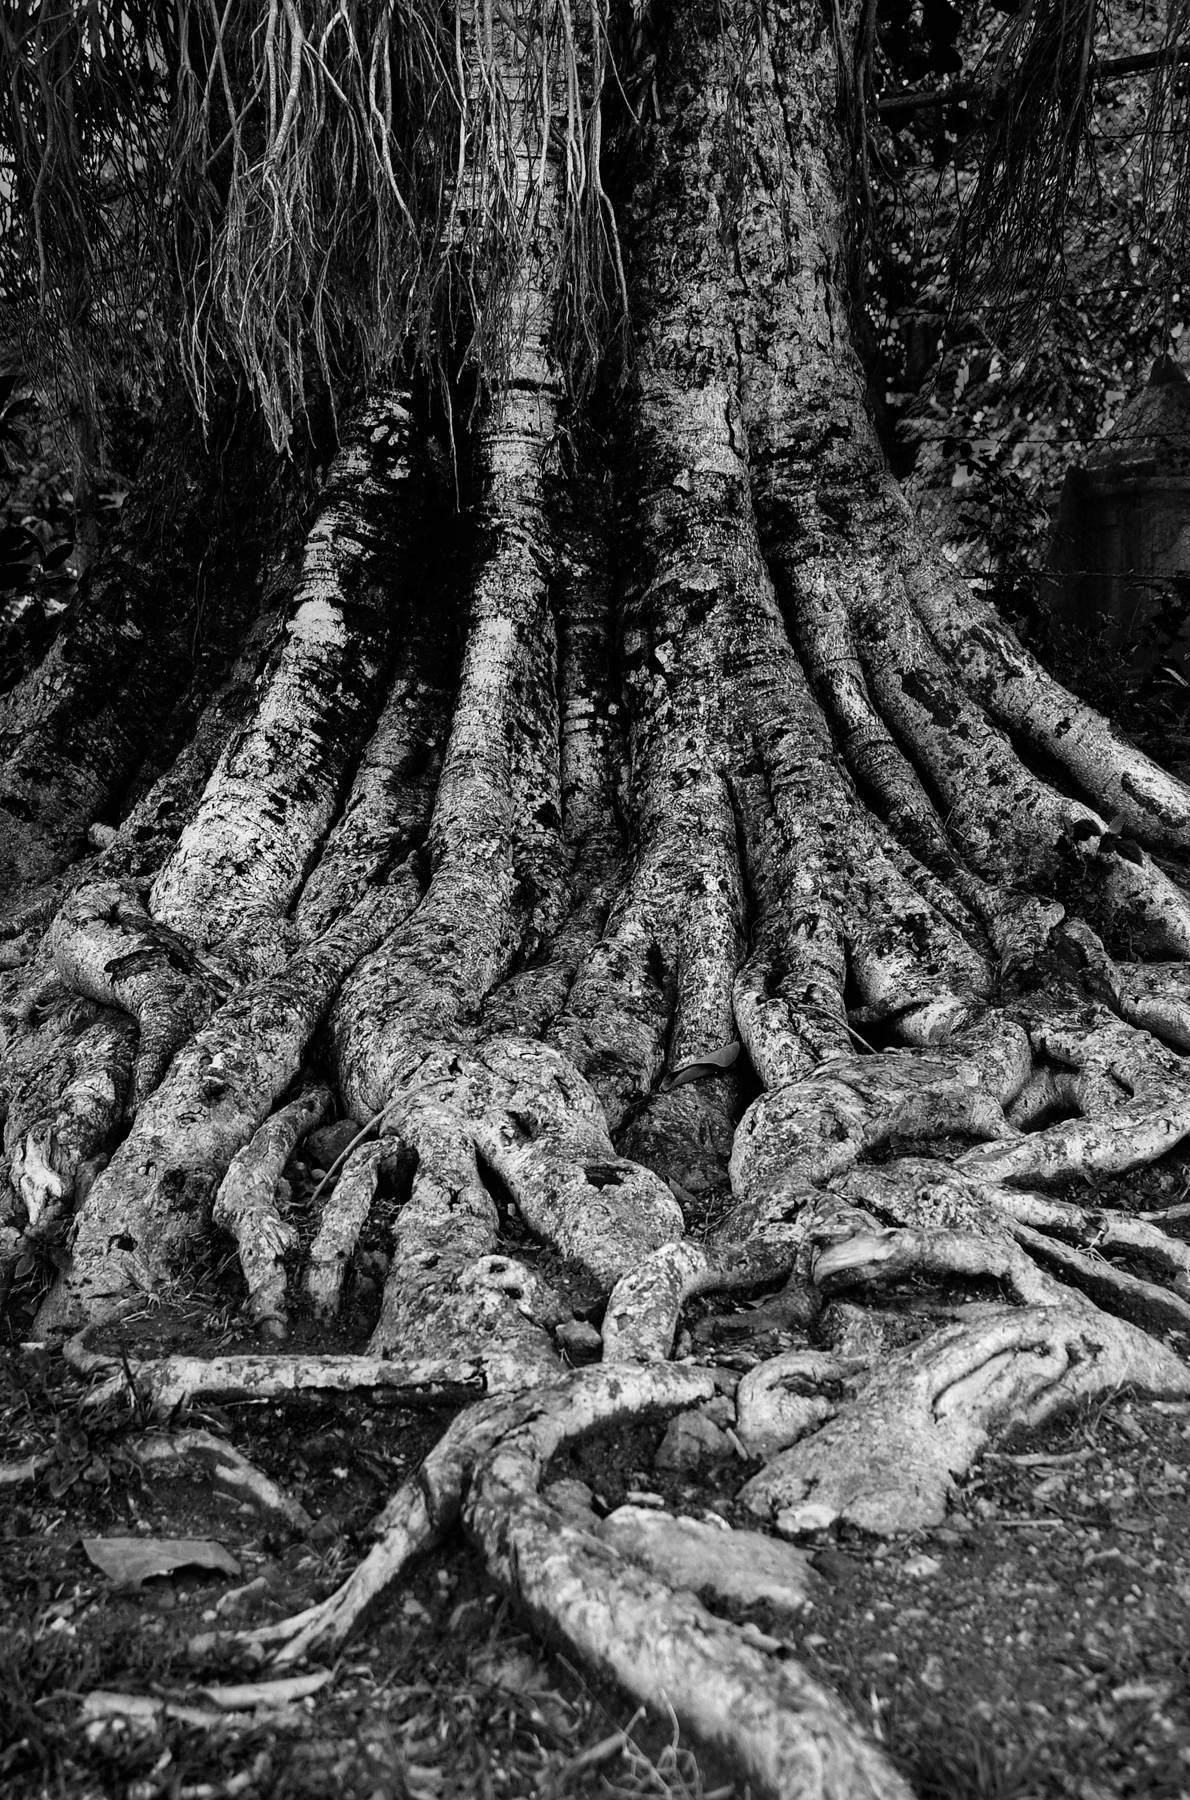 Mohan L. Mazumder Black and White Photograph - Blessing for the Trees, Black & White Photography by Indian Artist "In Stock"